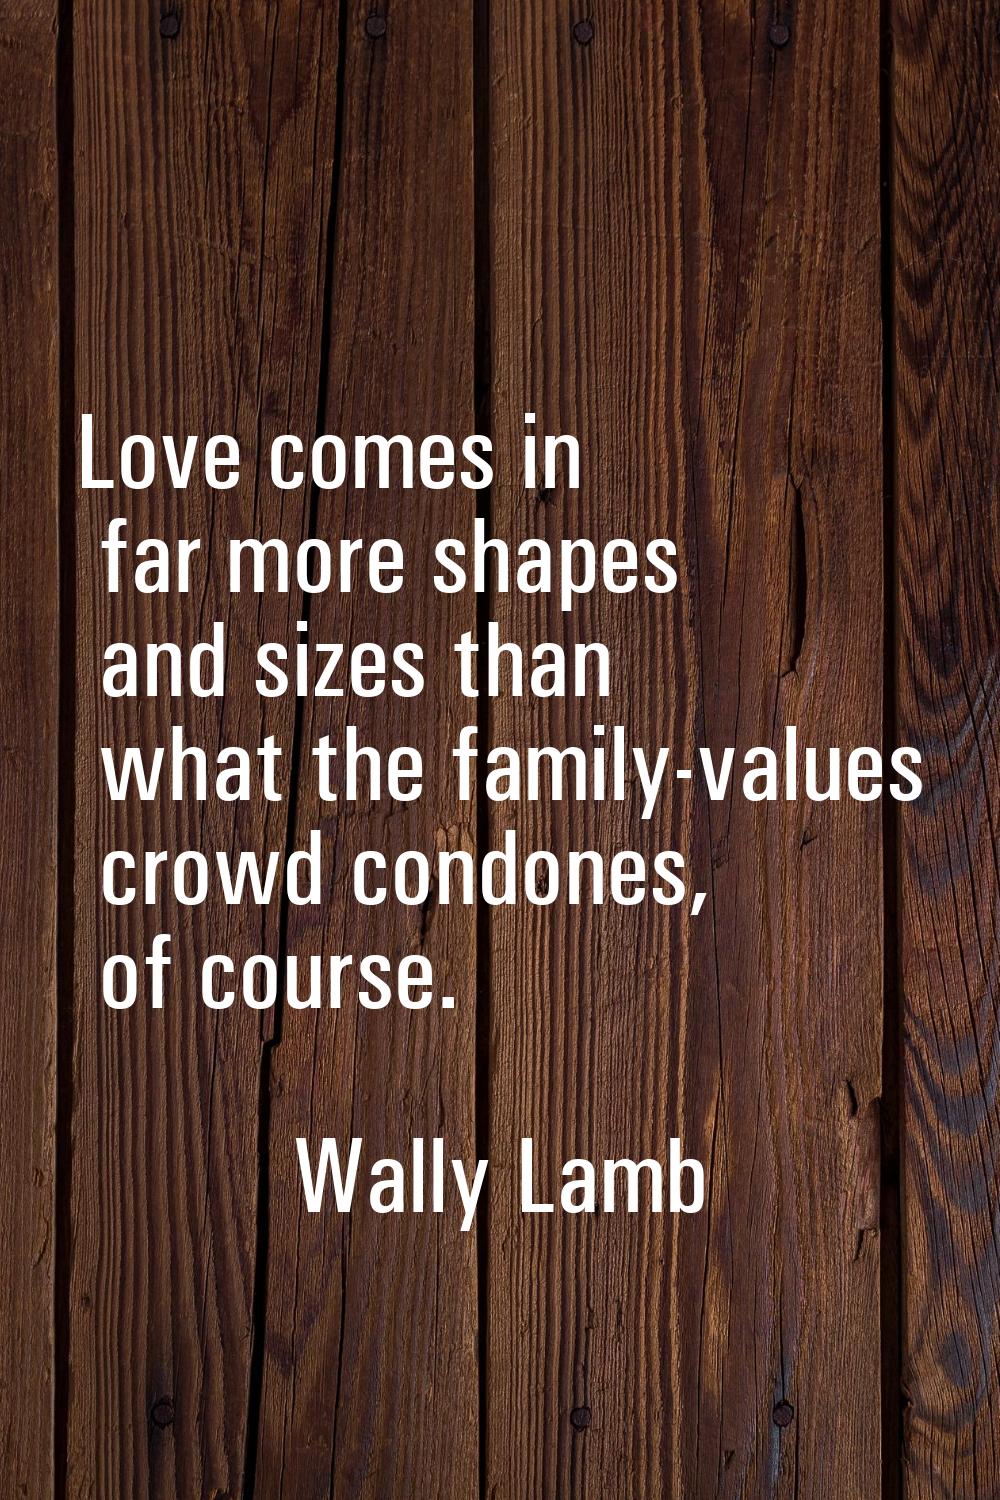 Love comes in far more shapes and sizes than what the family-values crowd condones, of course.